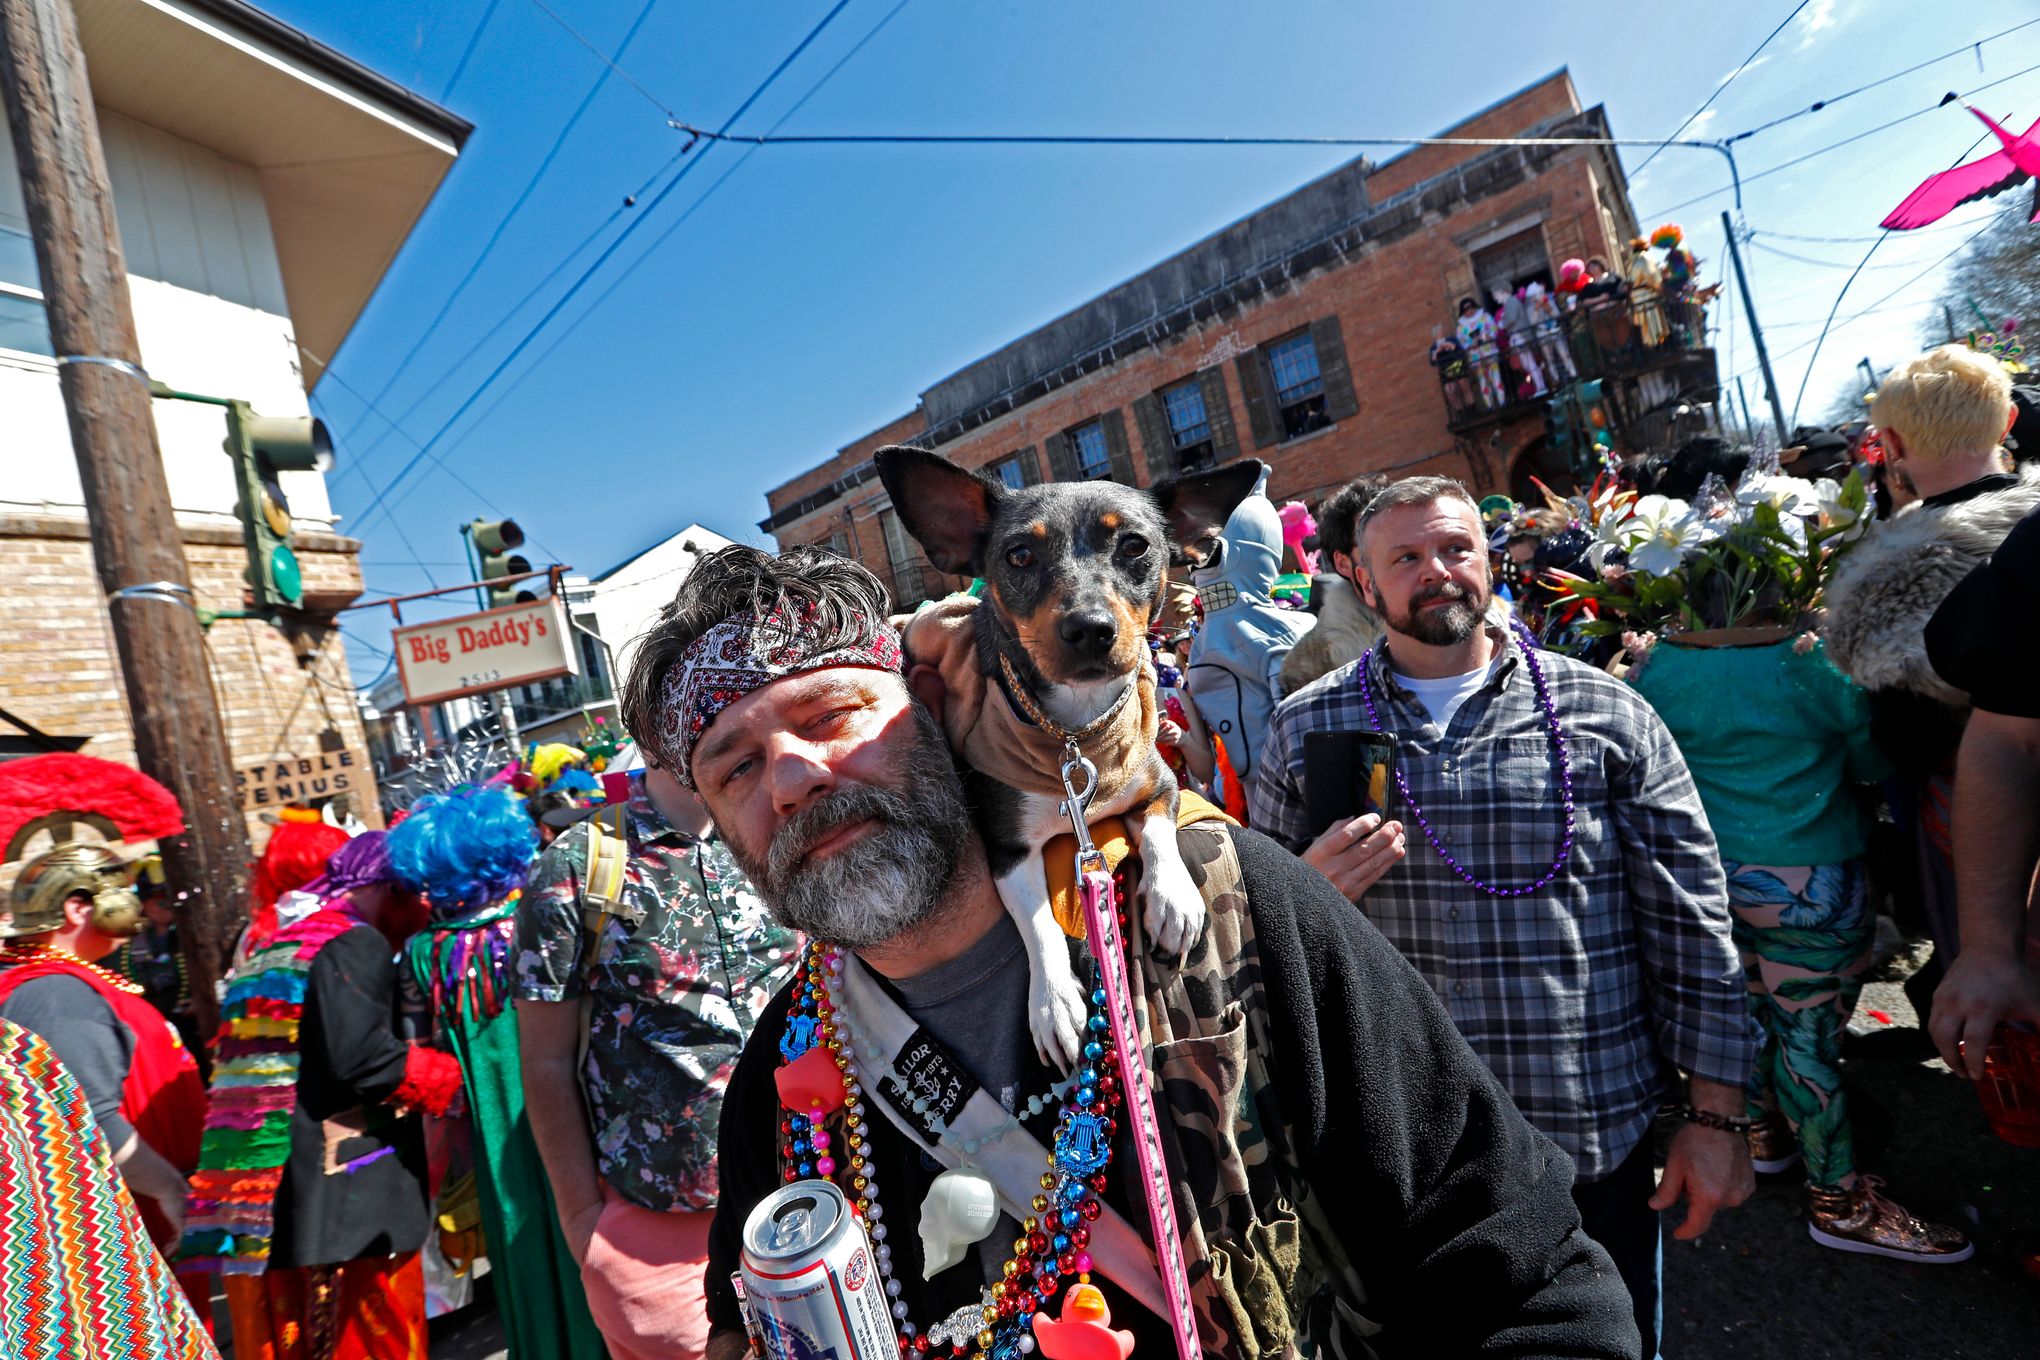 Costumes, beads and music: Mardi Gras comes to a close